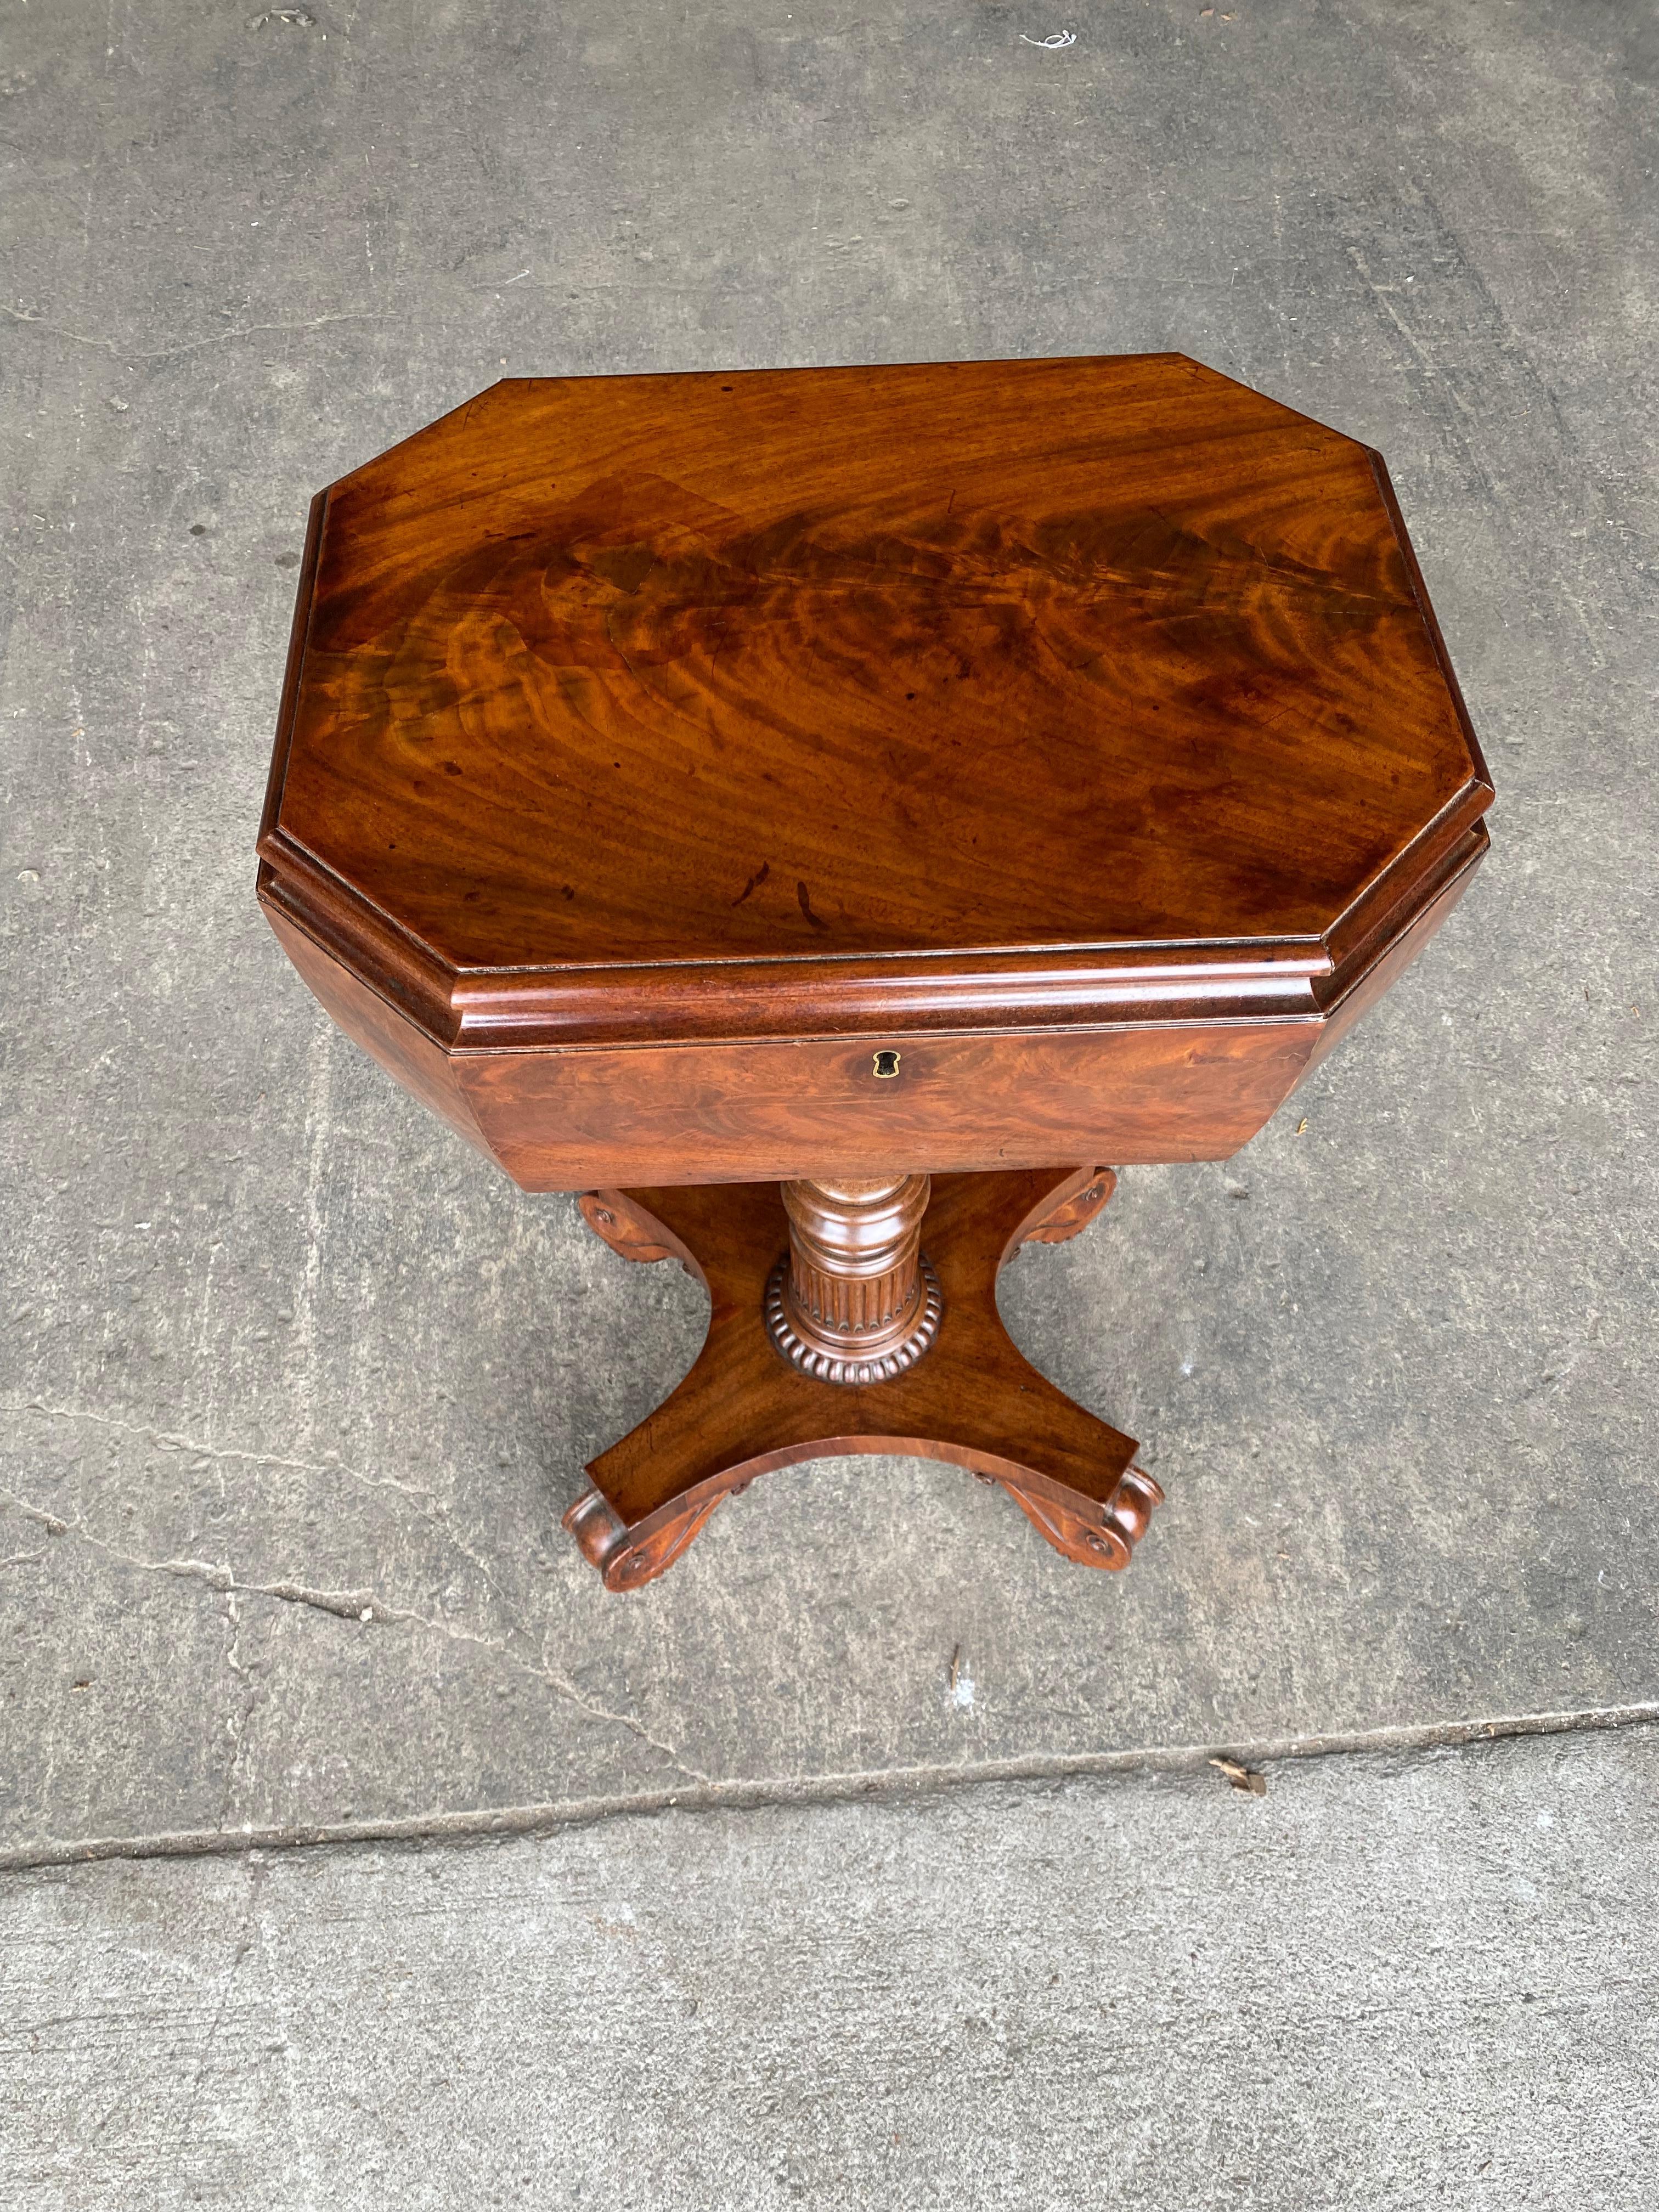 19th century English figured mahogany teapoy side table, finely carved base and feet. Great color. Size is perfect as a side or end table.